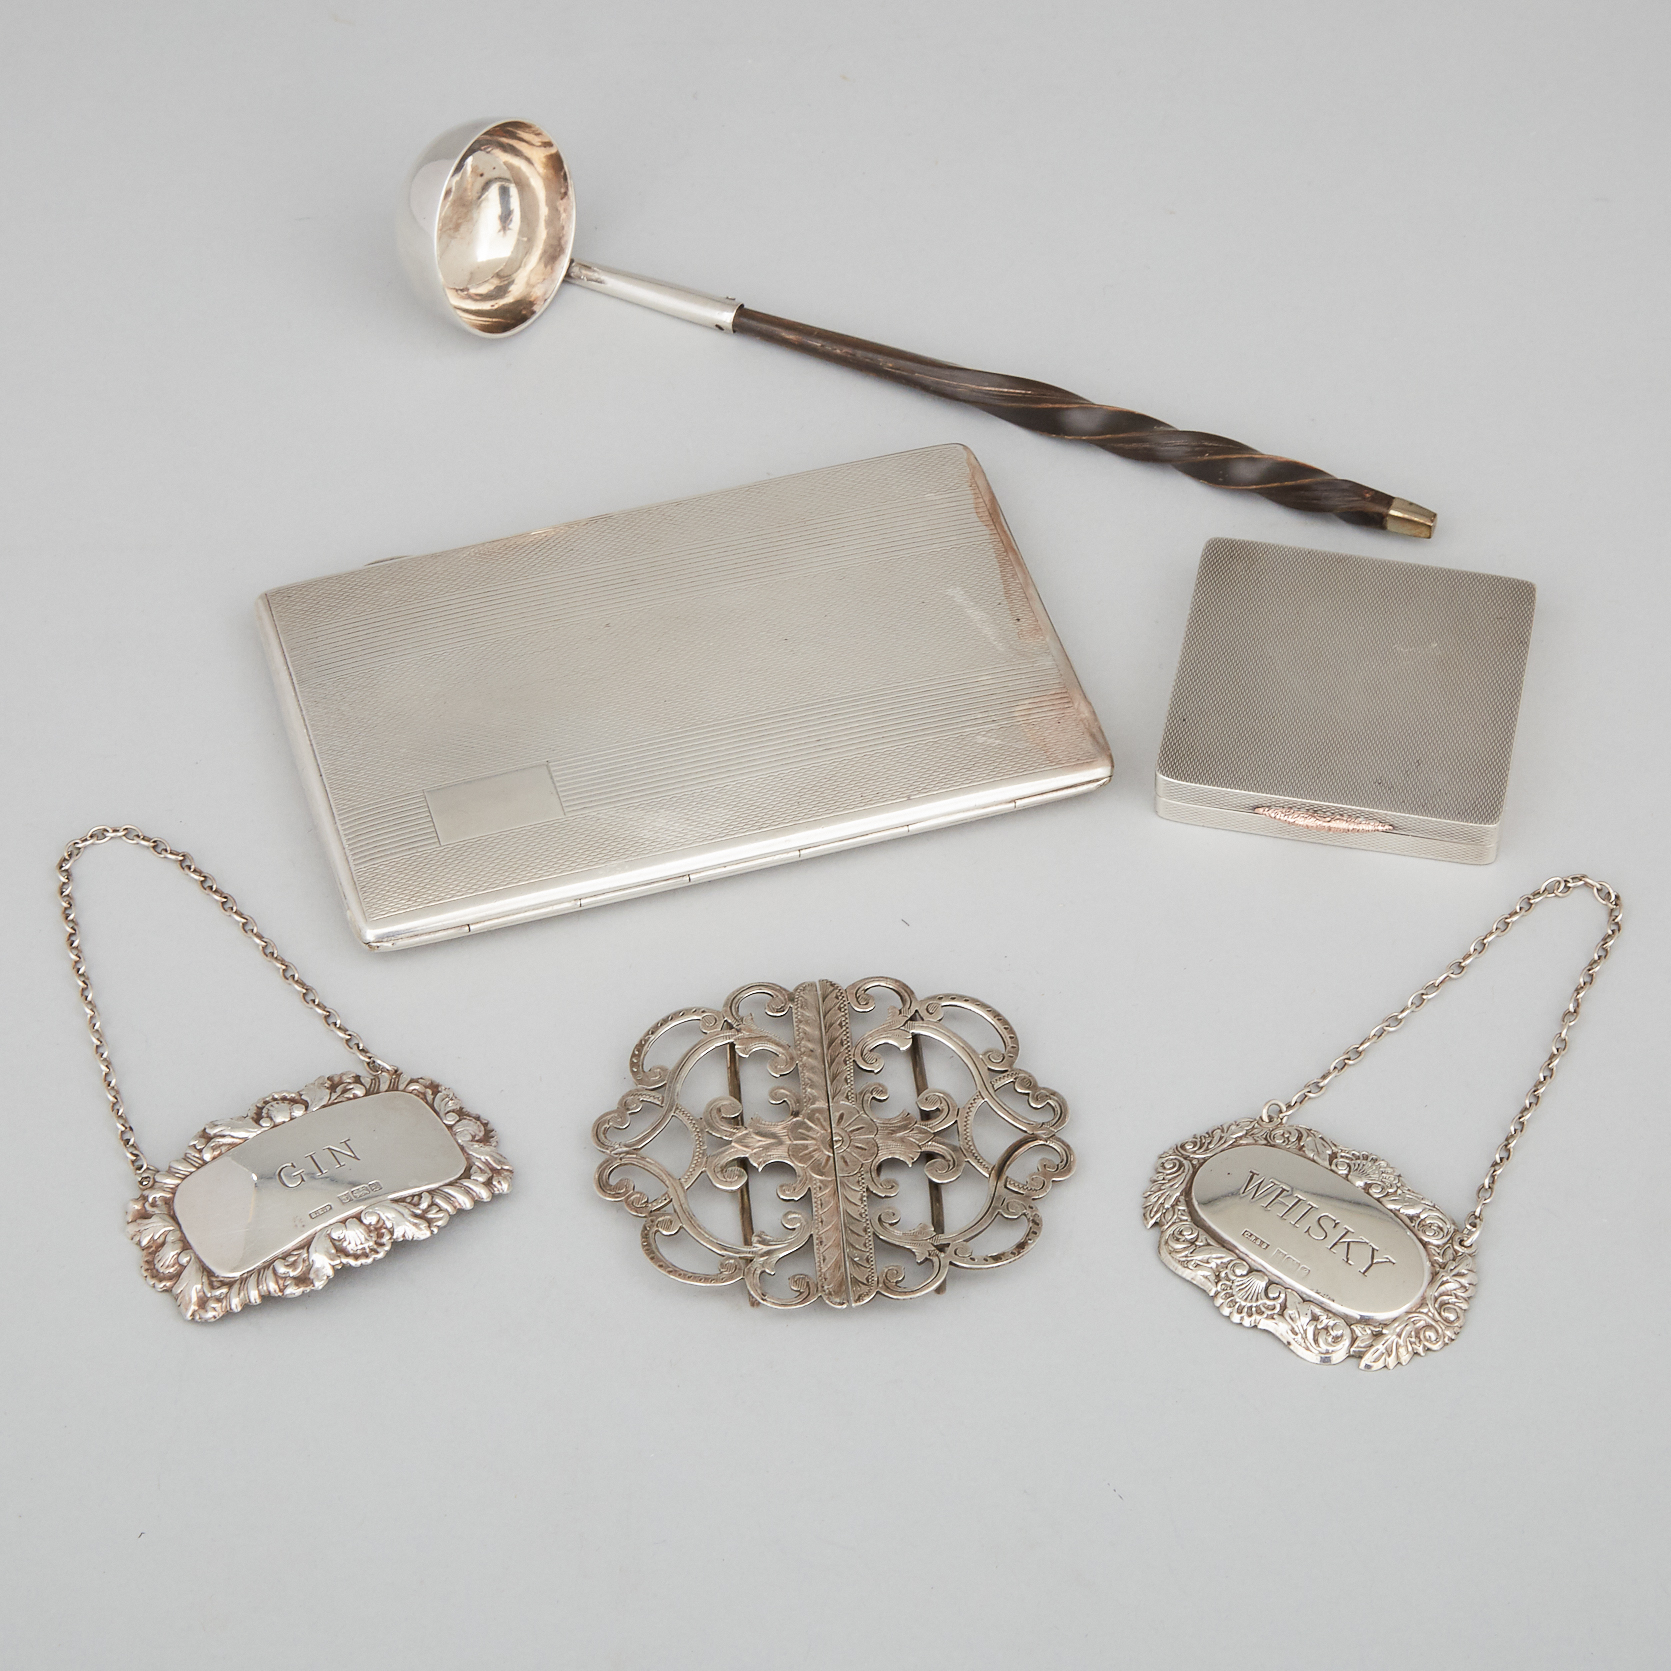 English Silver Cigarette Case, Compact, Belt Buckle, Two Decanter Labels and a Cream Ladle, 19th/20th century